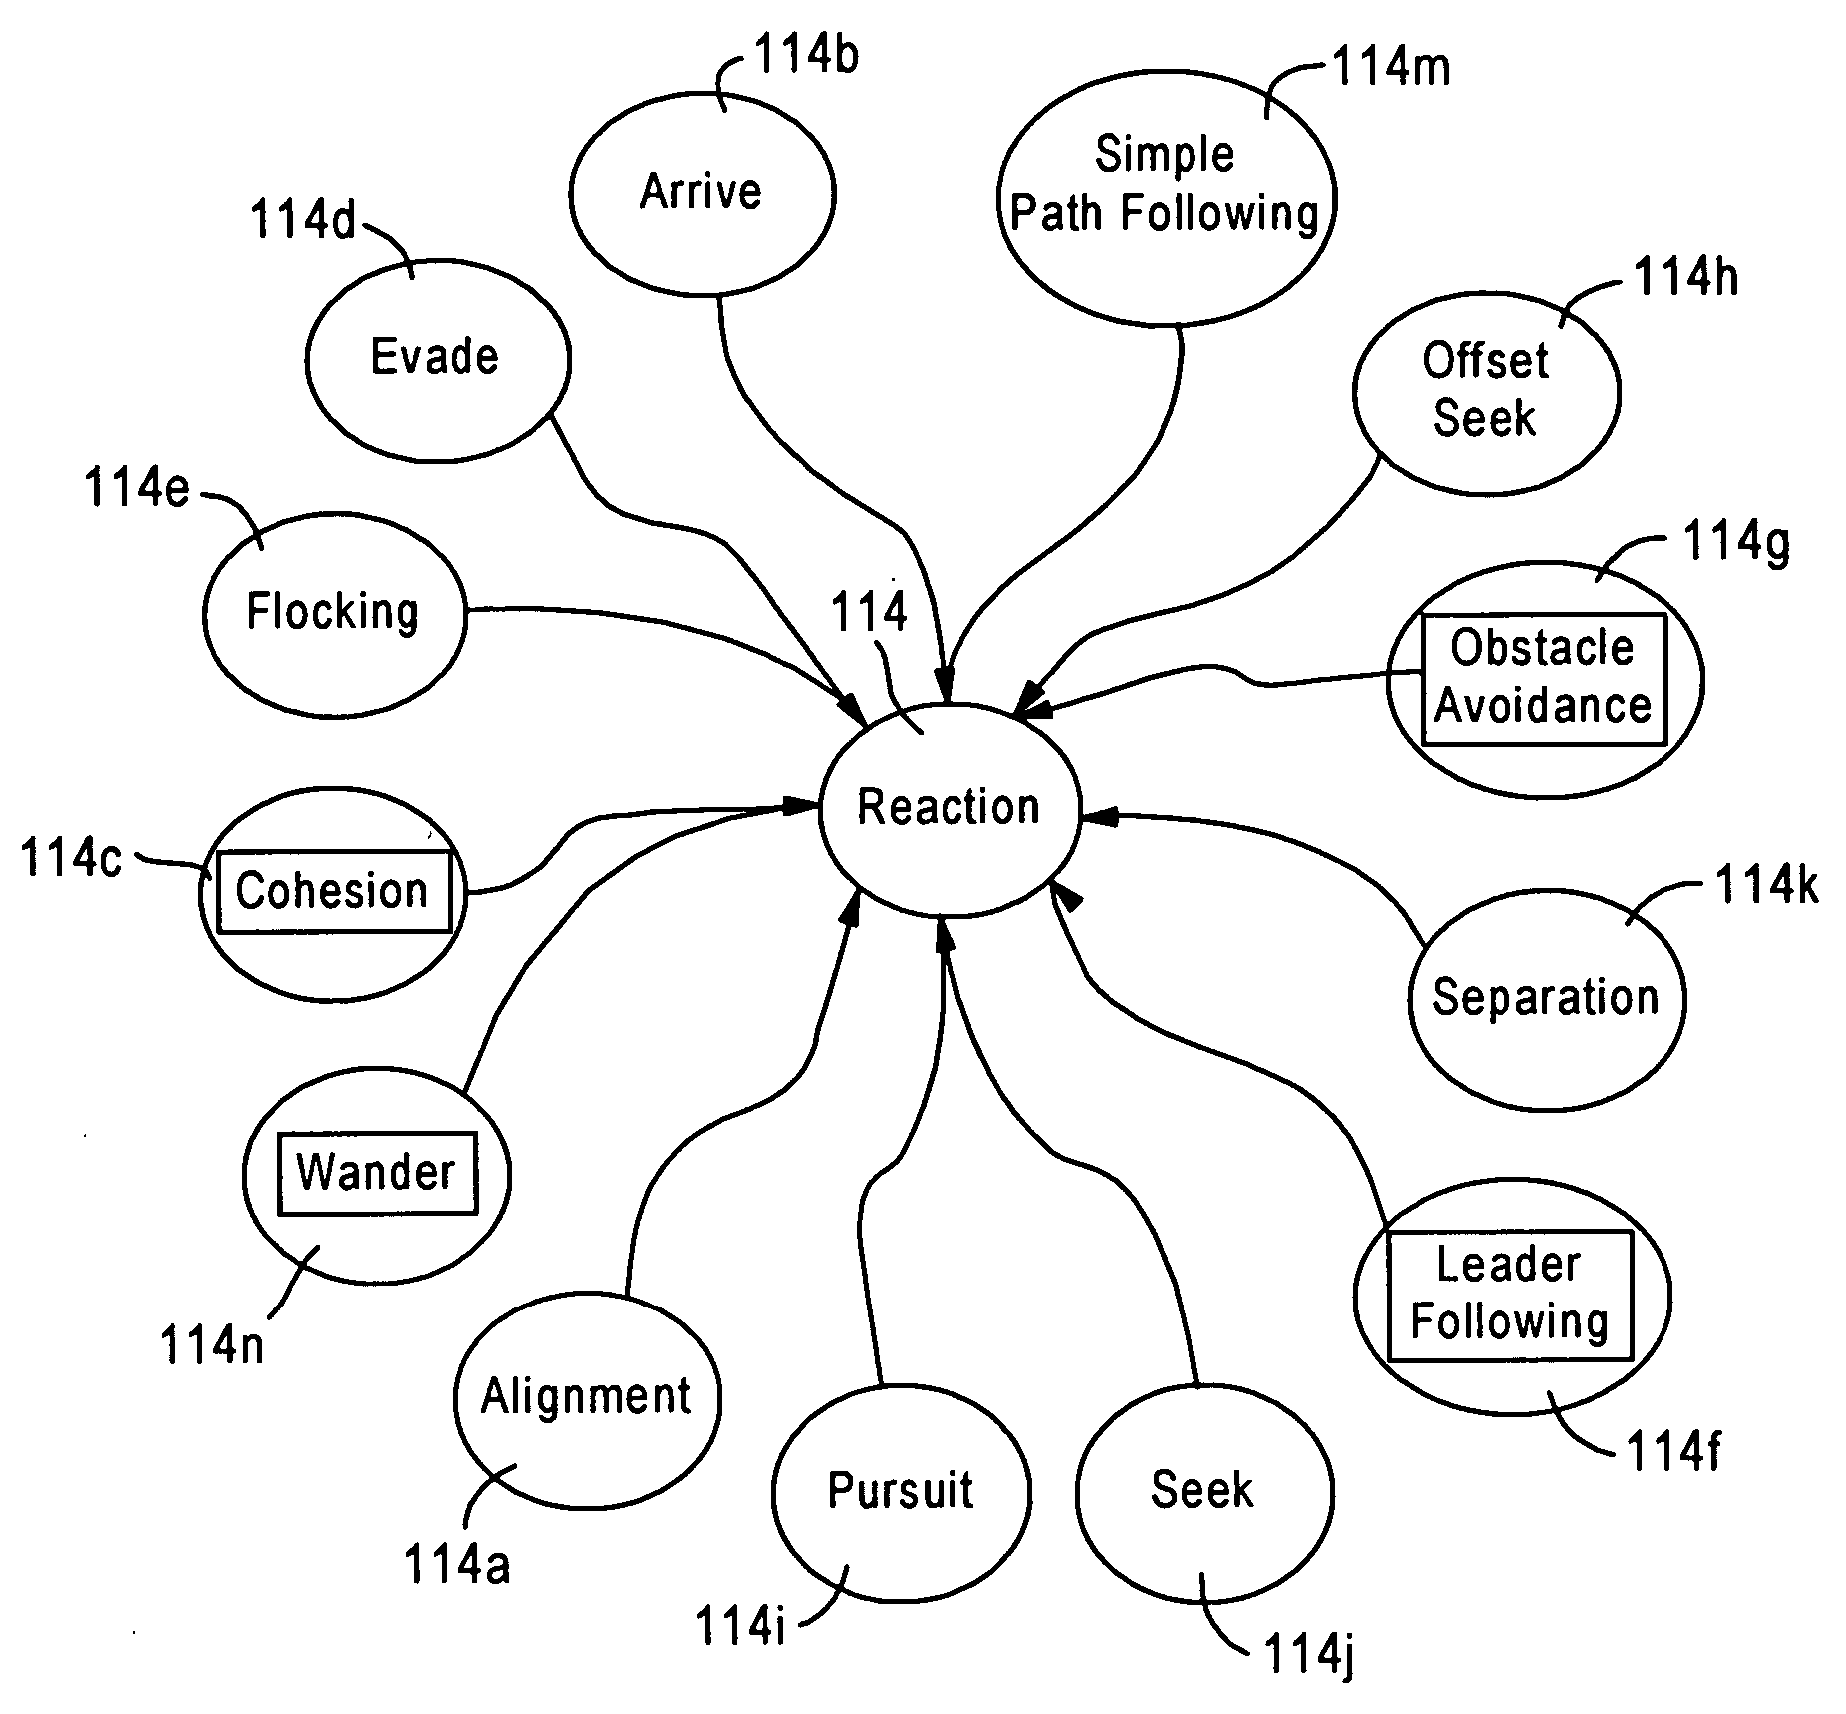 Arrangement for autonomous mobile network nodes to organize a wireless mobile network based on detected physical and logical changes